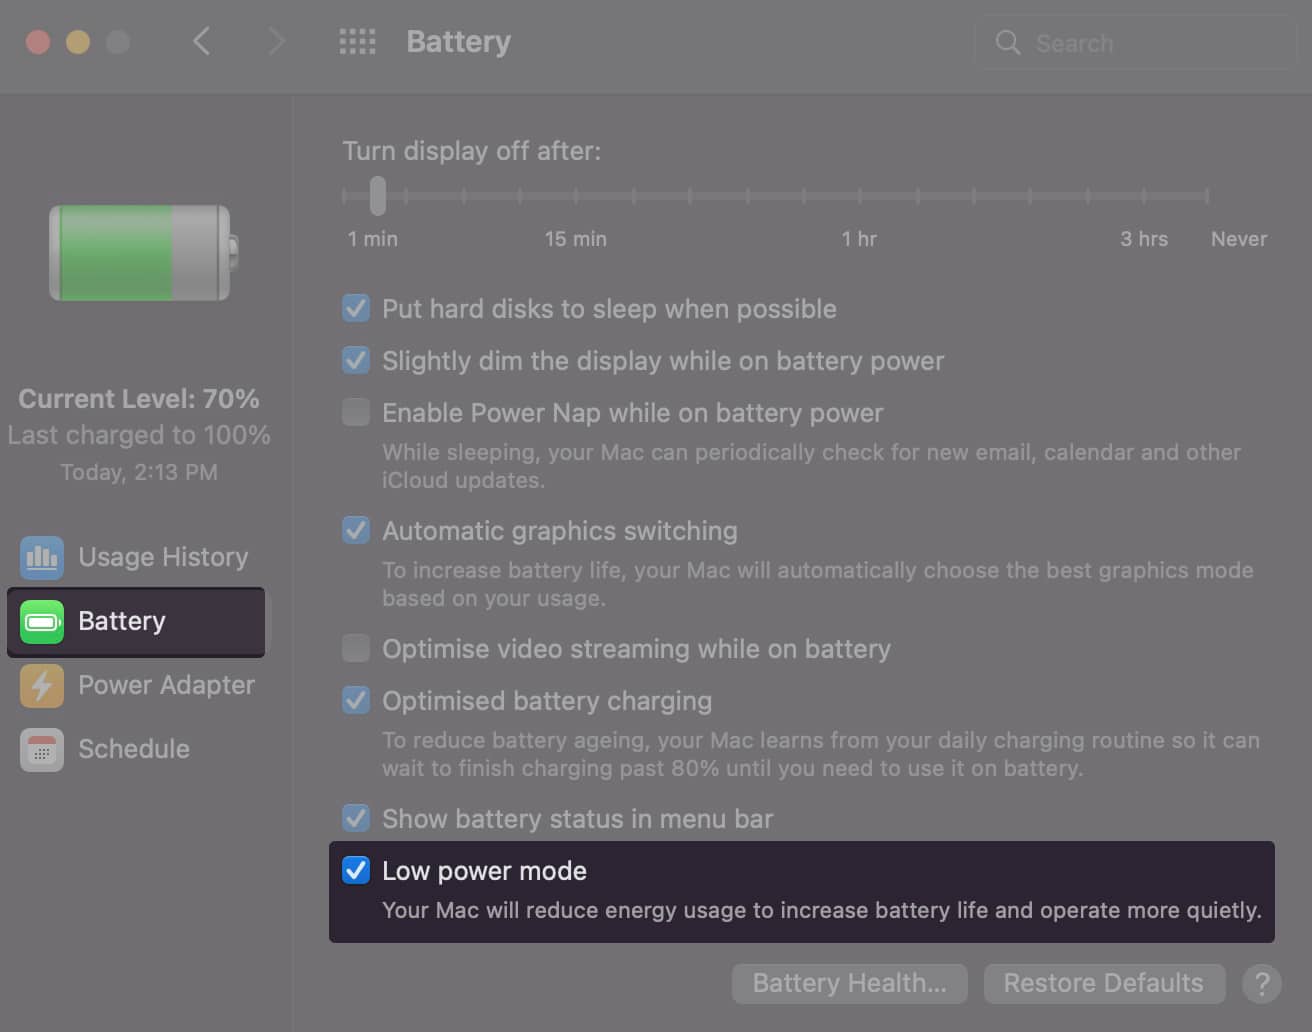 How to enable Low Power mode on Mac